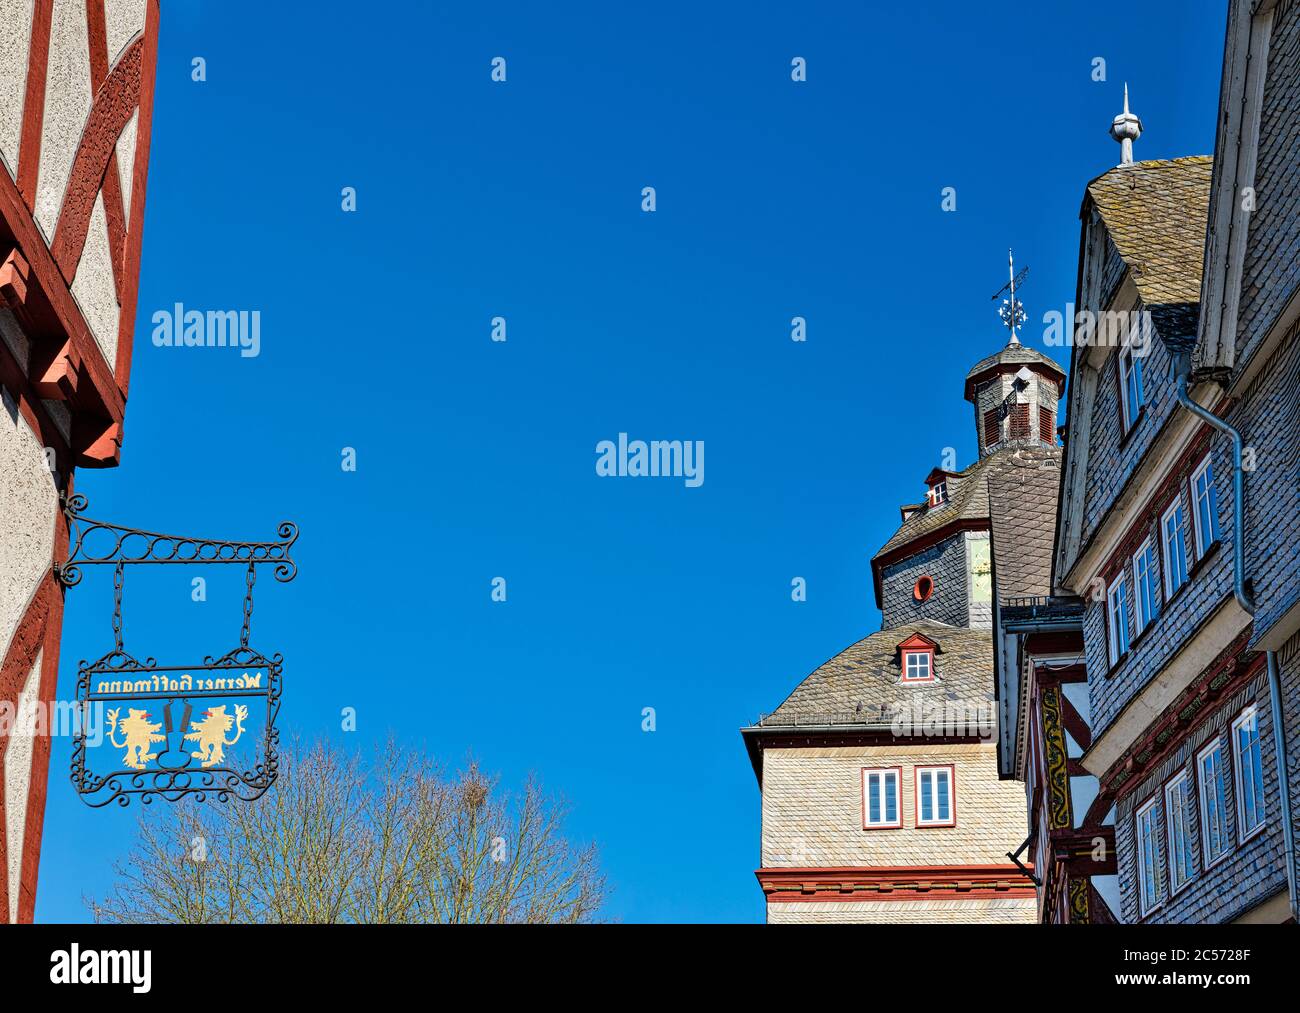 Europe, Germany, Hesse, Lahn-Dill-Bergland nature park, Herborn town, half-timbered gable at the market square, town hall, guild coat of arms Stock Photo